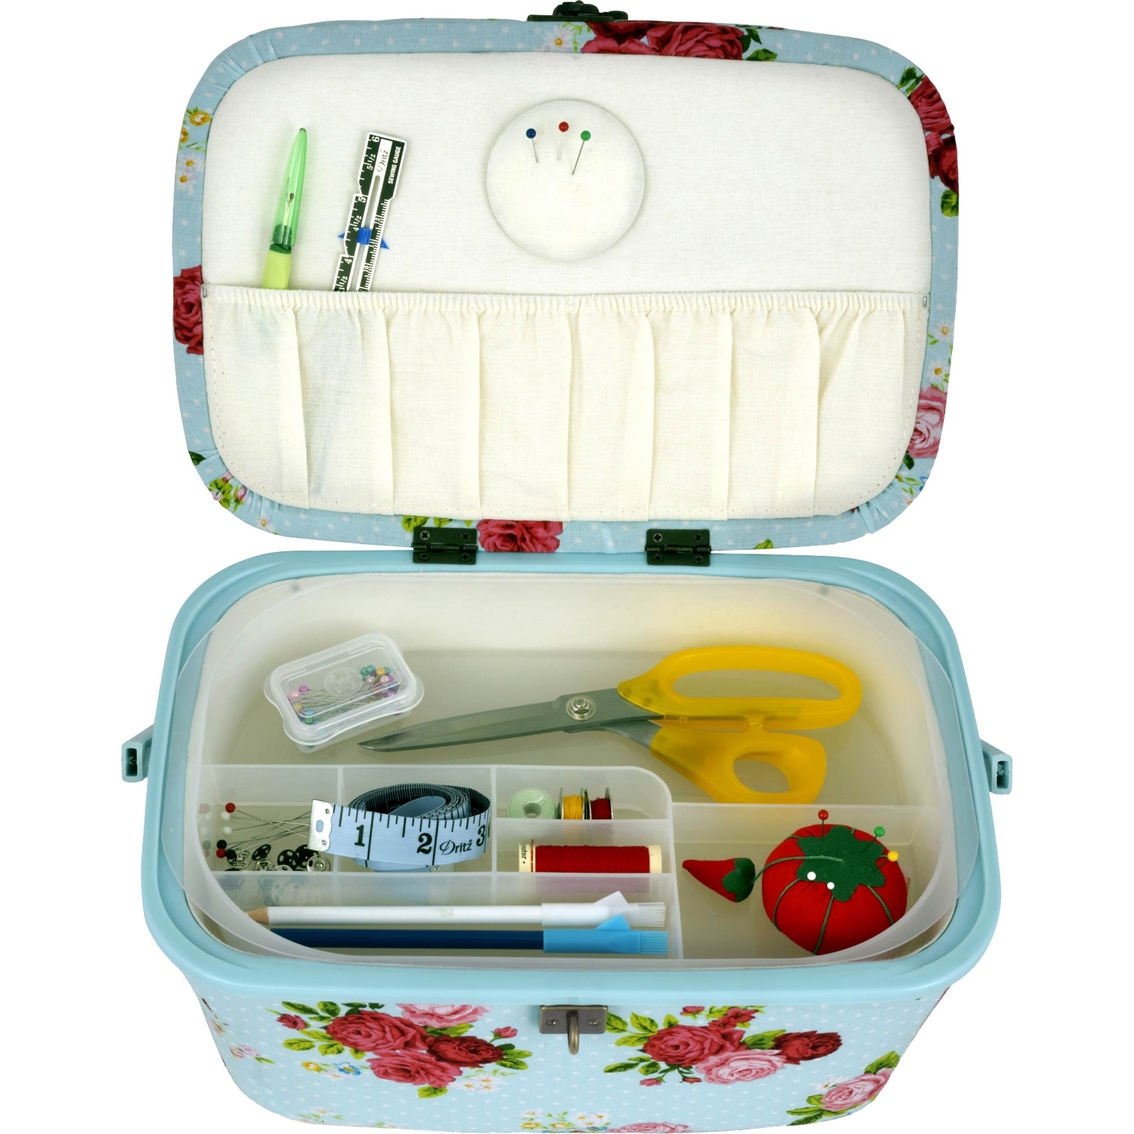 Dritz Oval Sewing Basket, Large - Image 3 of 3